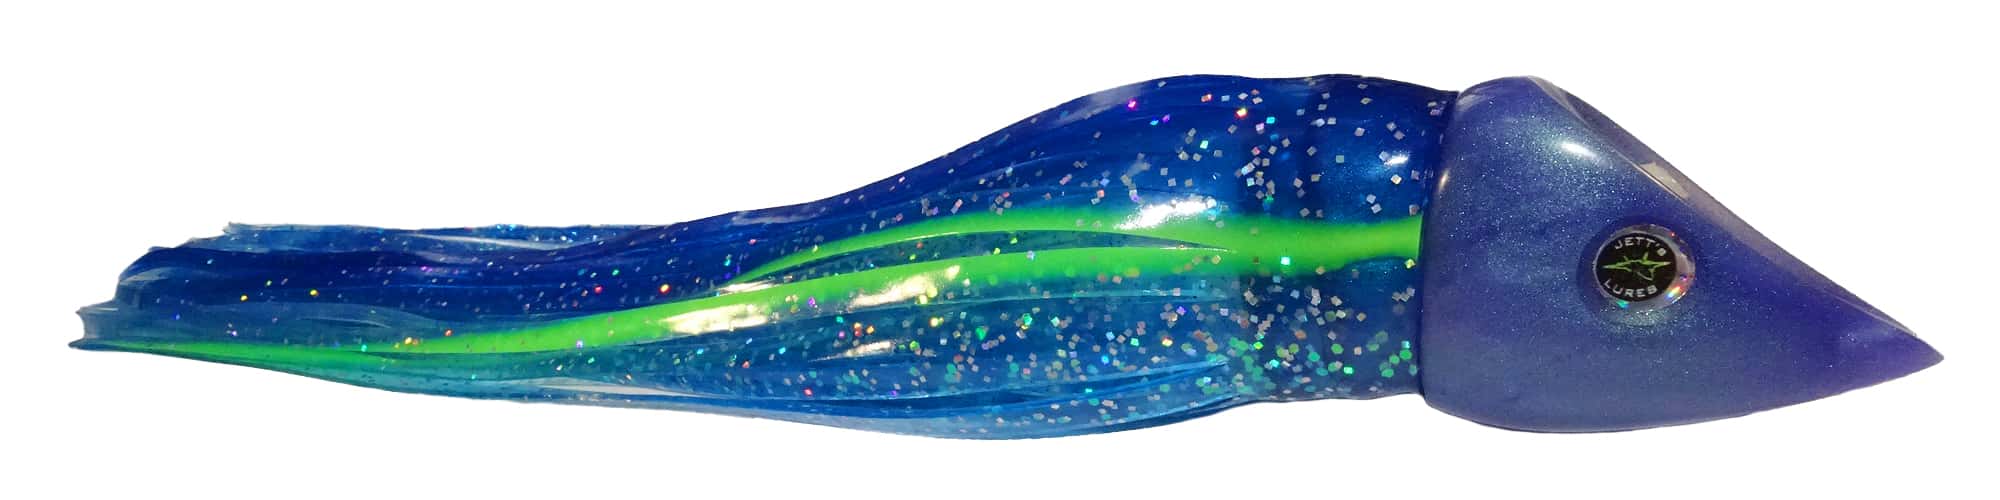 Jetts Lures - Wedgie Series - Skirted - Blue Scheme